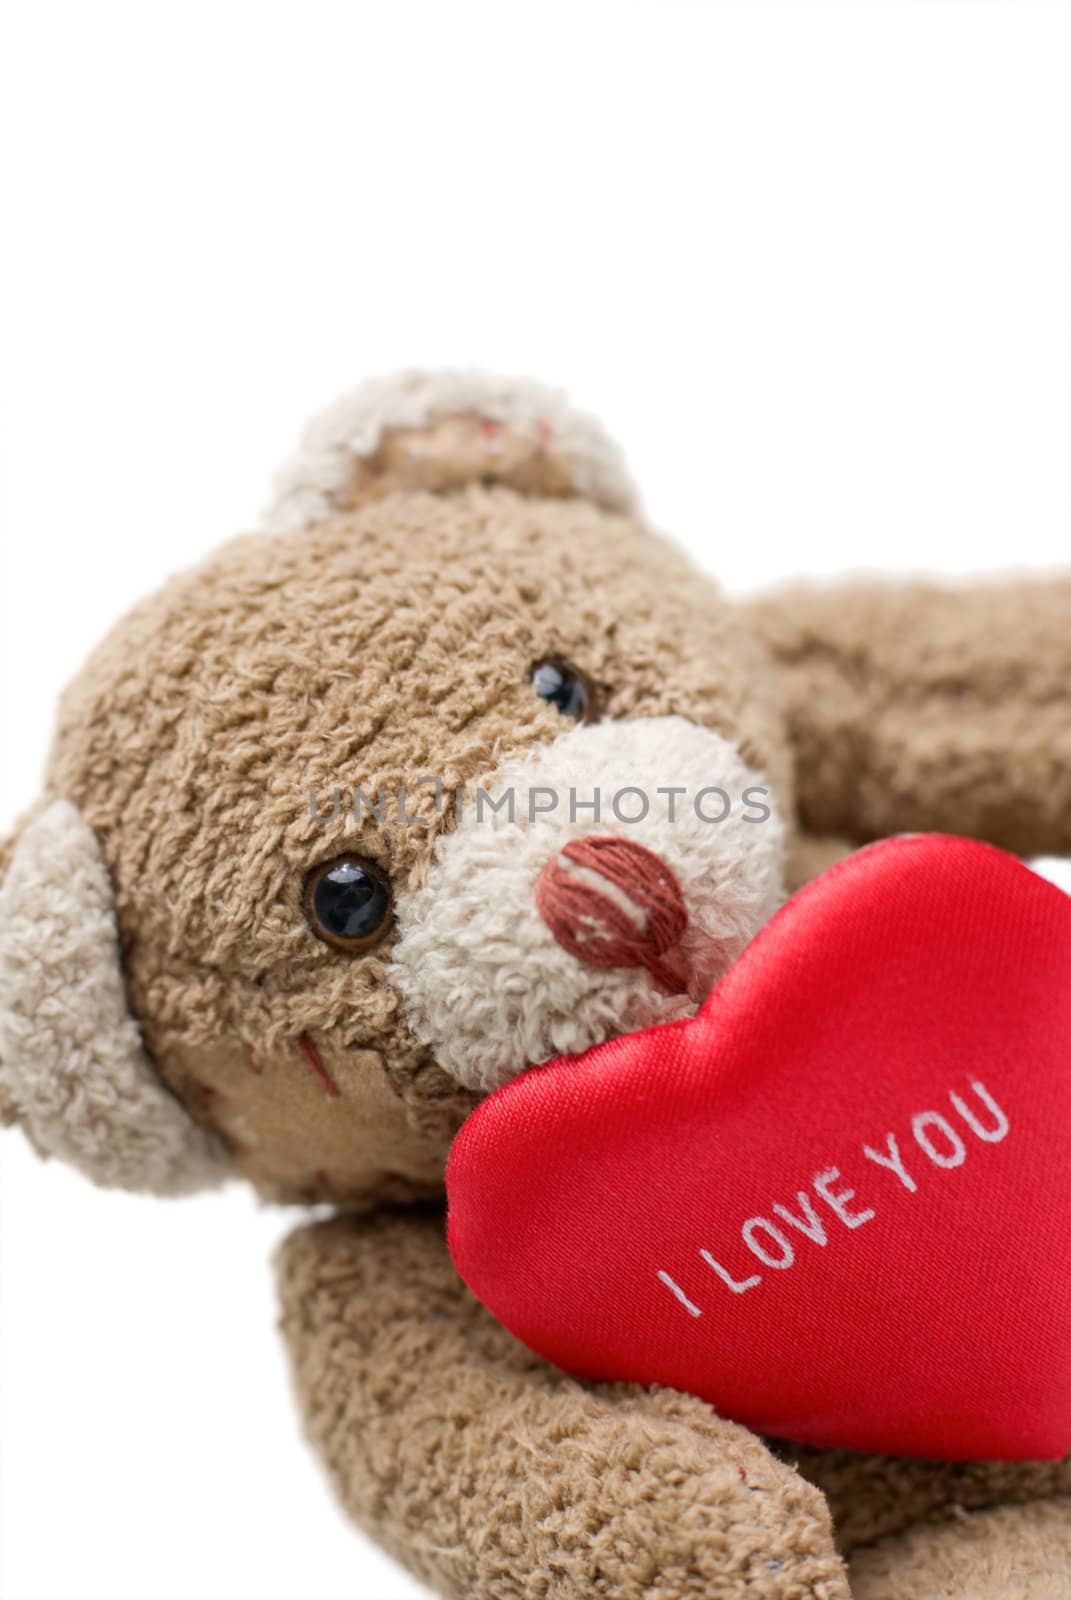 Teddy bear holding red heart - selective focus on the eye and on 'I love you" inscription.